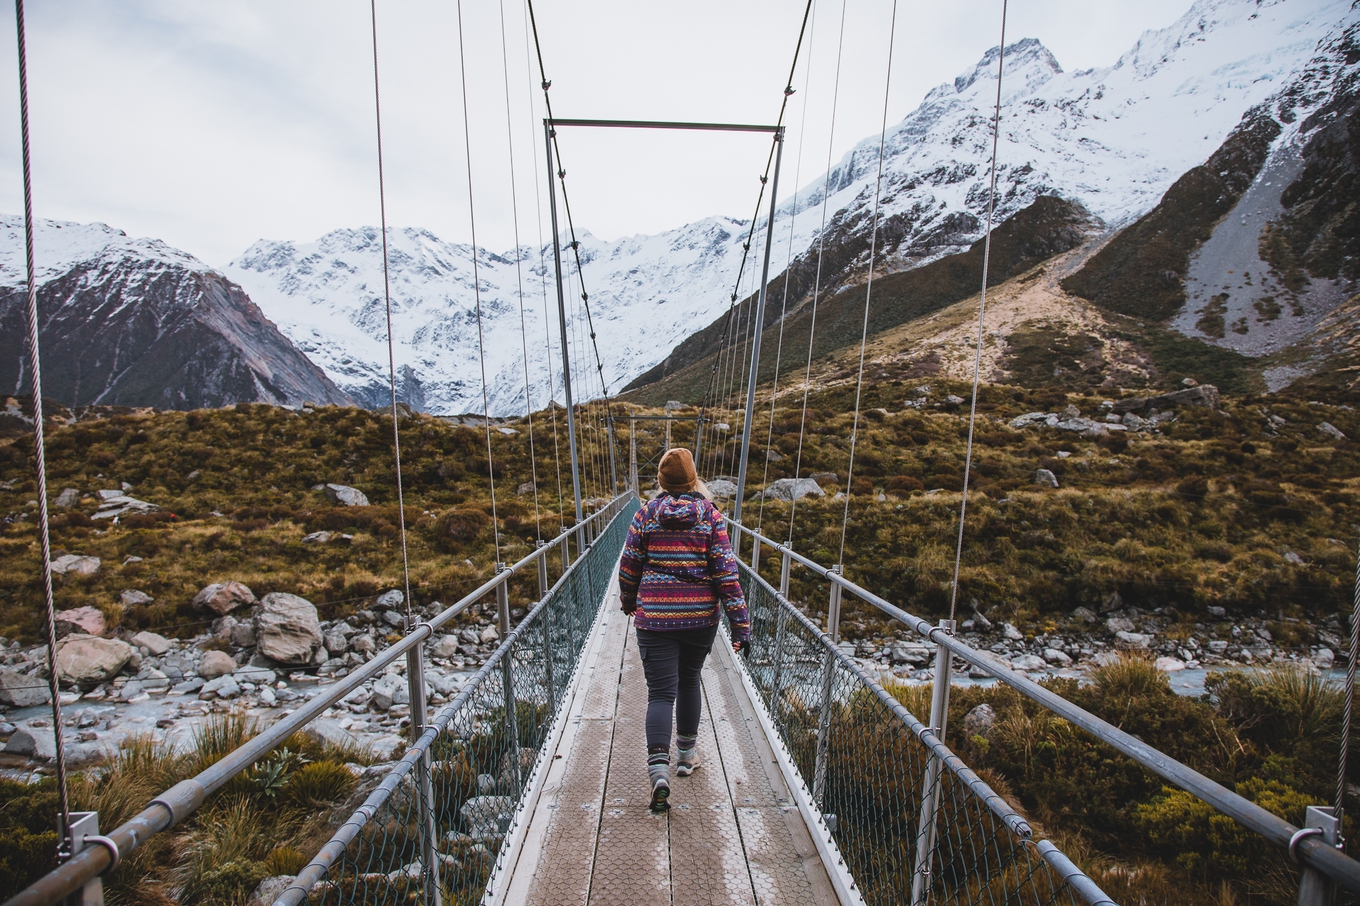 A woman on a hike; she is on a bridge with a mountain in the background